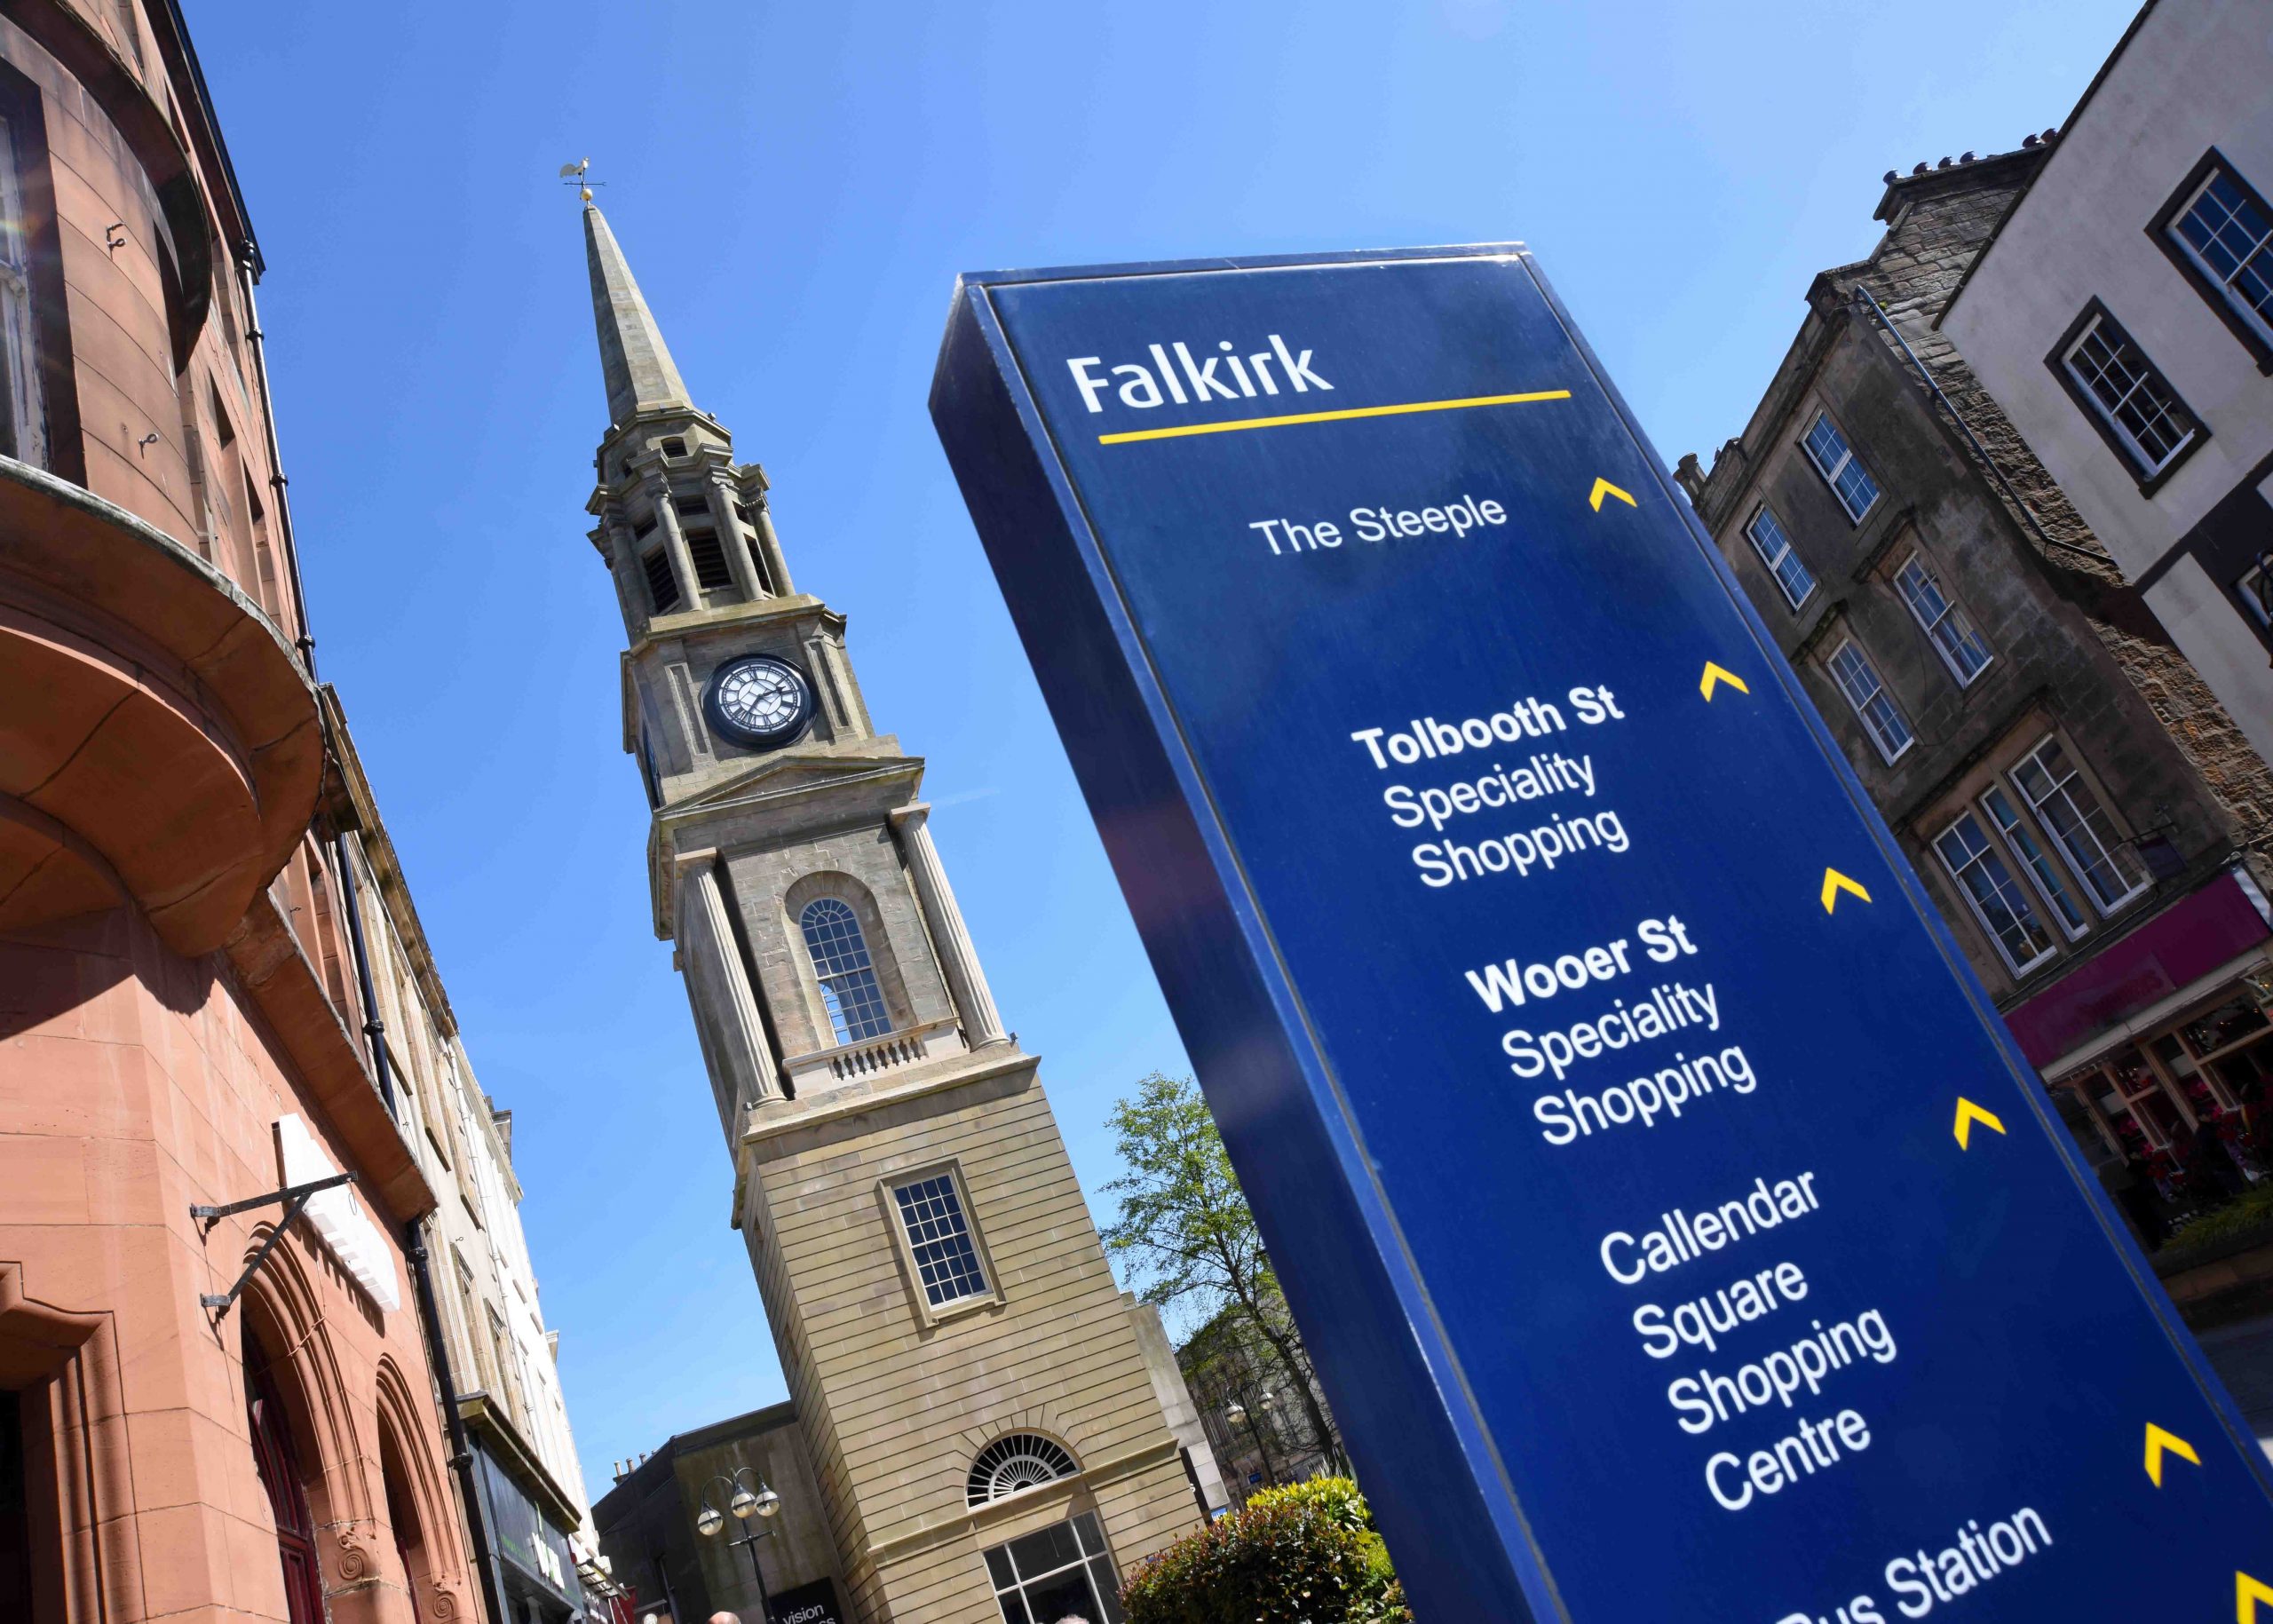 Falkirk town centre church and signboard